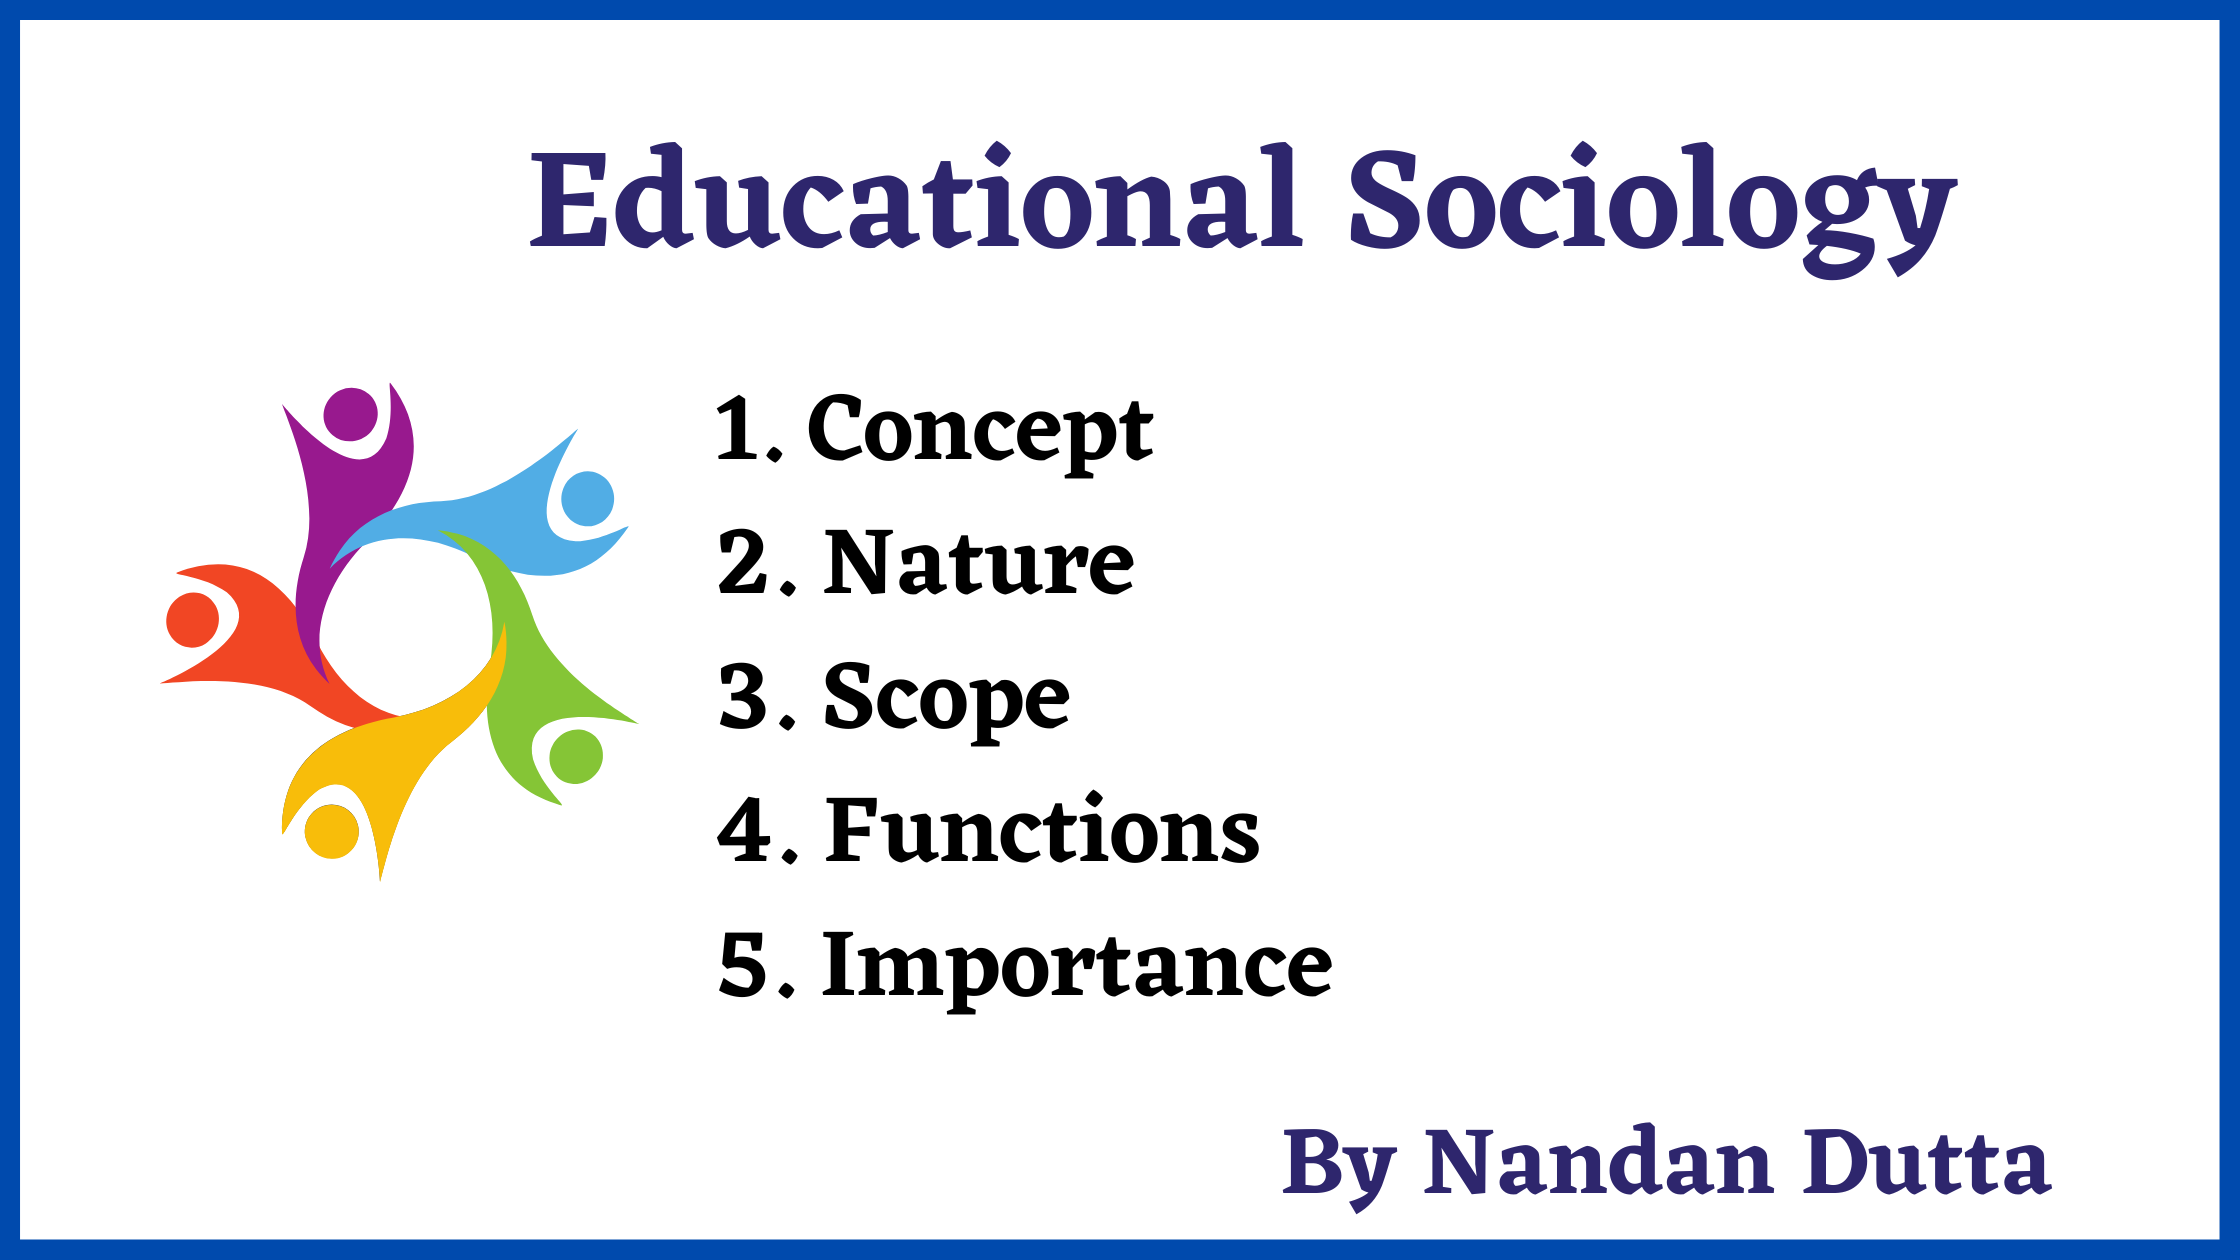 function of education in sociology